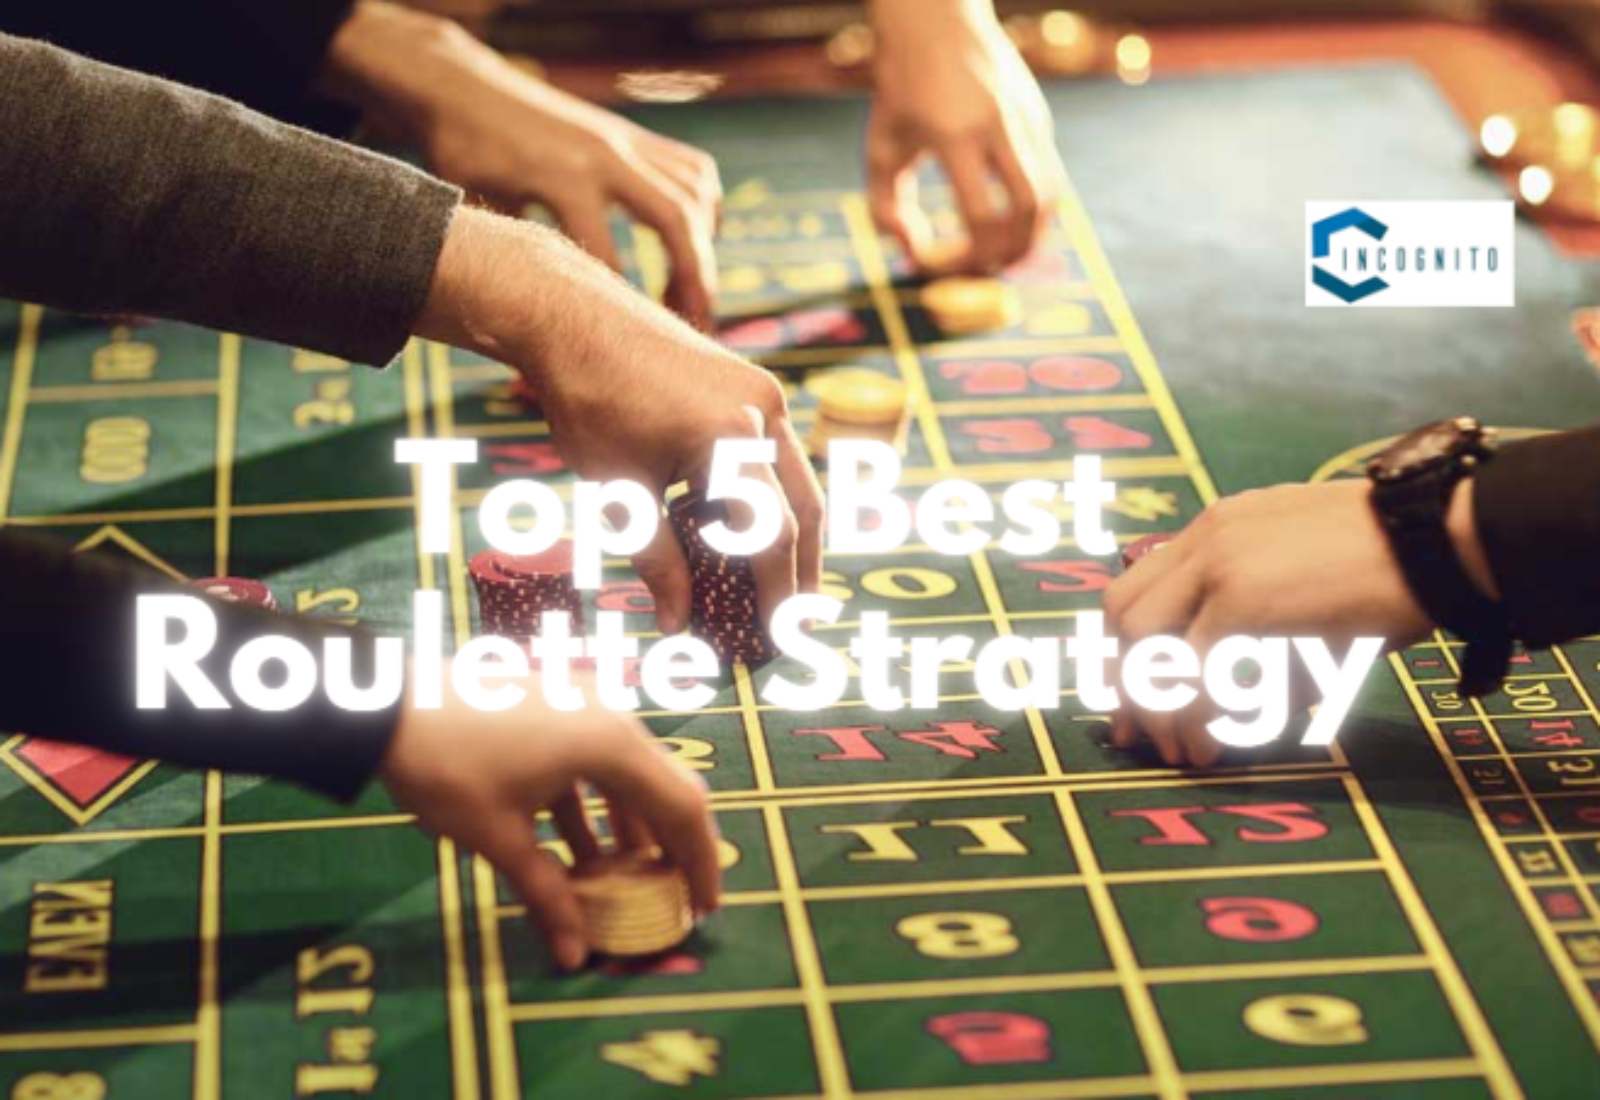 Top 5 Best Roulette Strategy